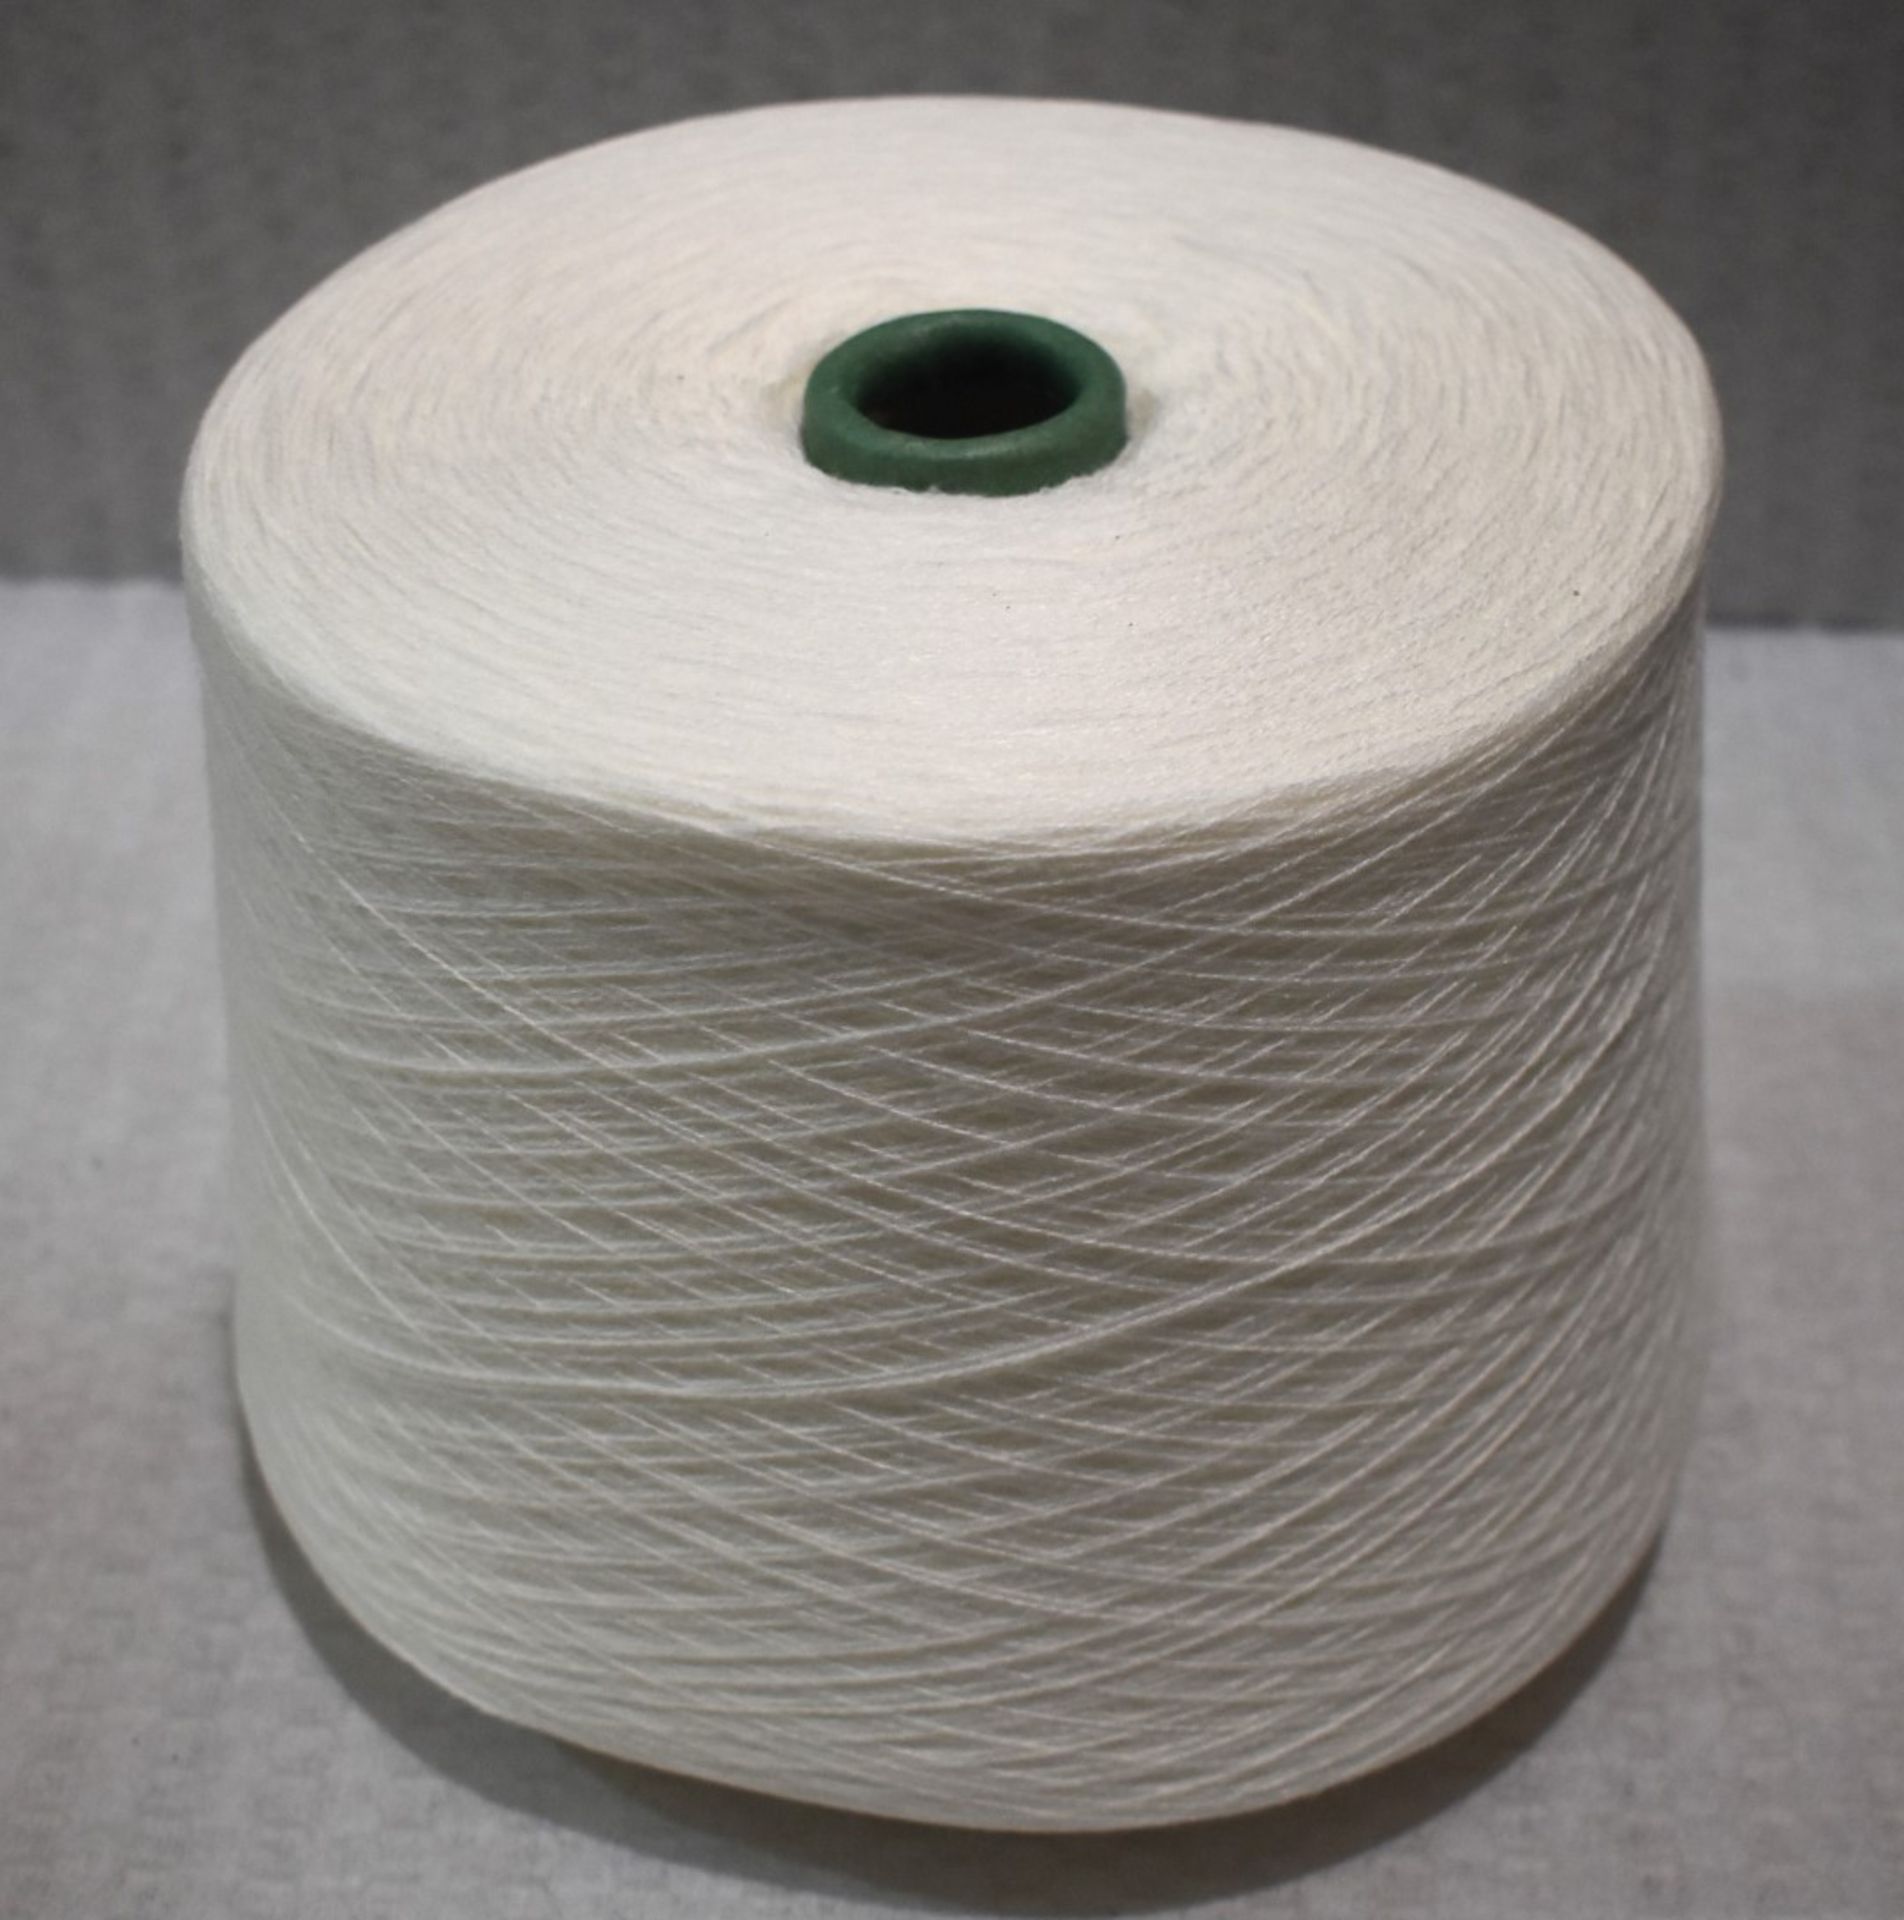 6 x Cones of 28/2 H.B 100% Acrylic Knitting Yarn - Colour: Ivory - Approx Weight: 1,300g - New Stock - Image 8 of 10